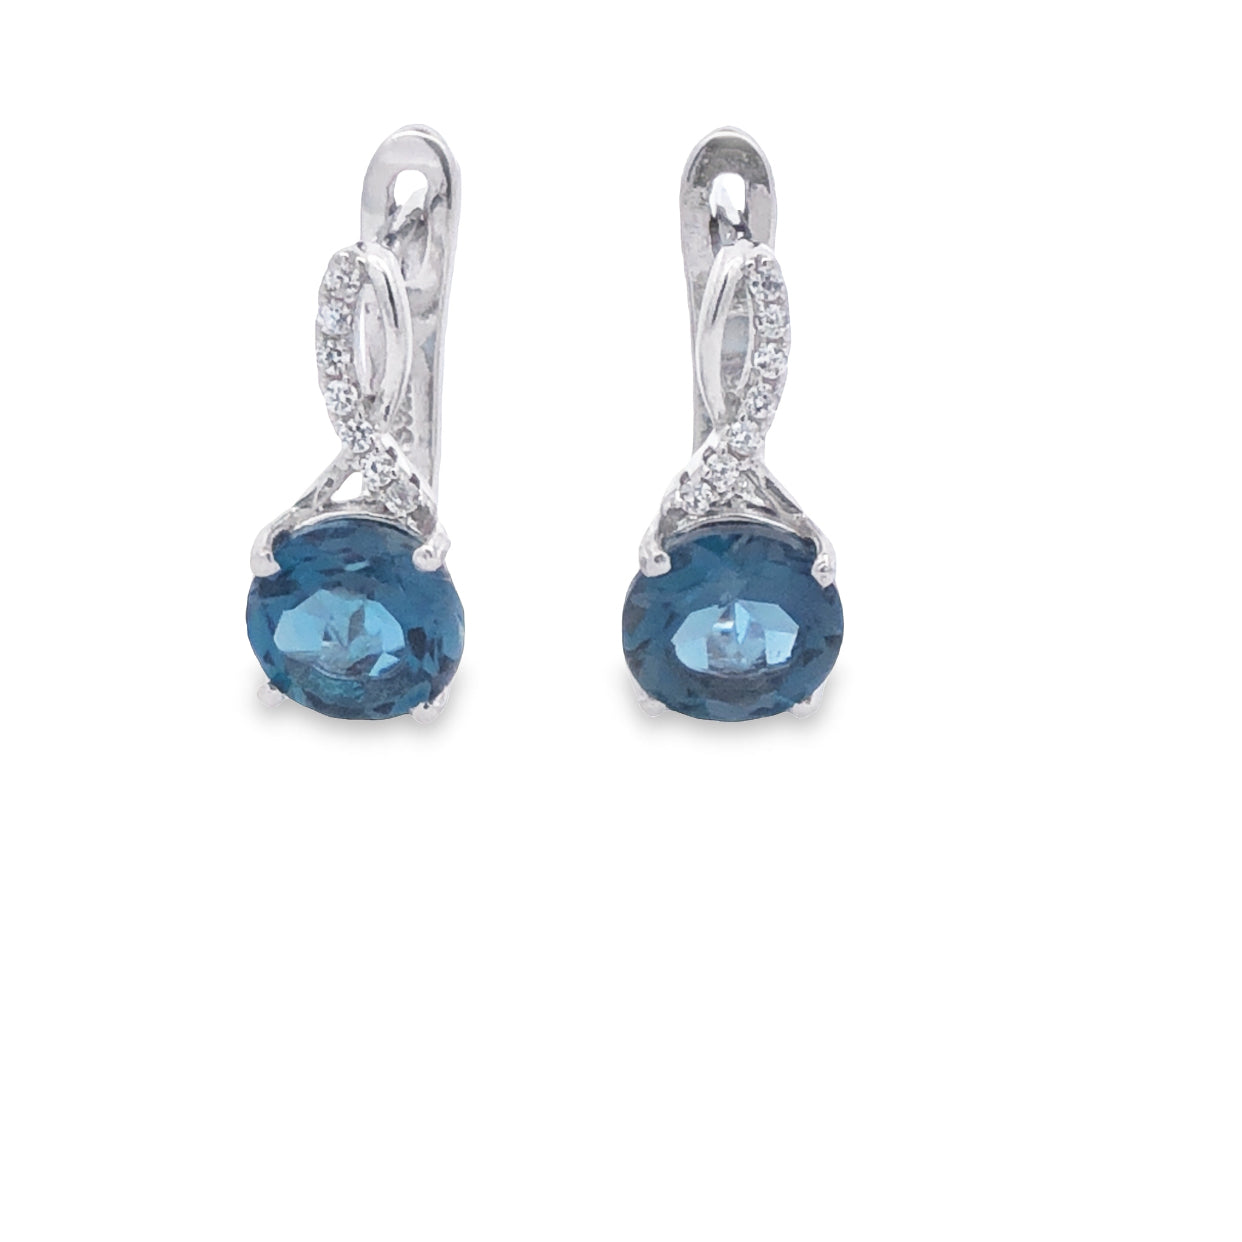 Sterling Silver Rhodium Plated London Blue Topaz And White Cz Set Earrings With Huggie Safety Back